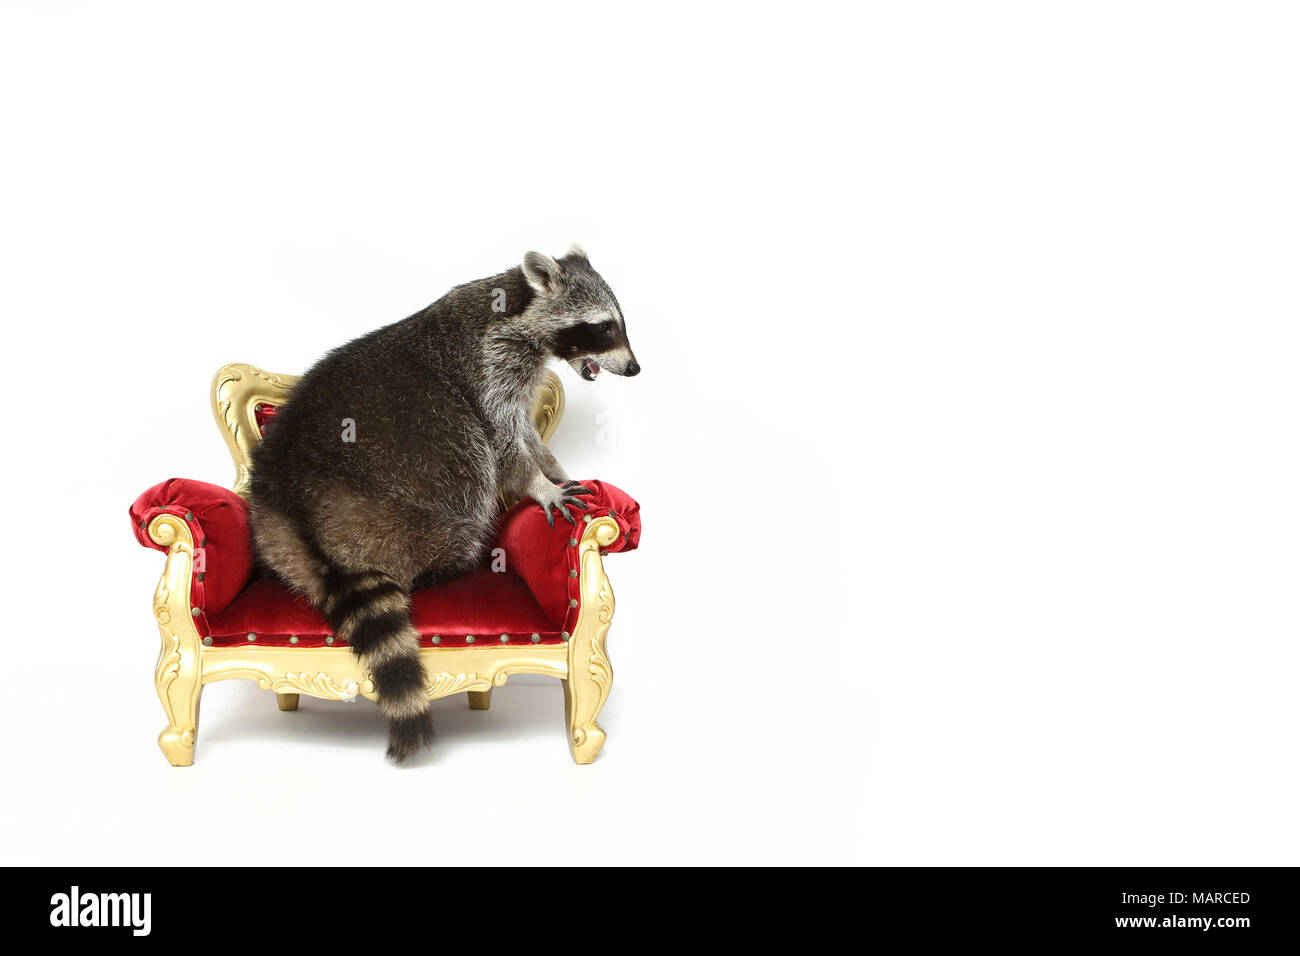 Raccoon (Procyon lotor). Adult sitting on a baroque armchair. Studio picture against a white background. Germany Stock Photo